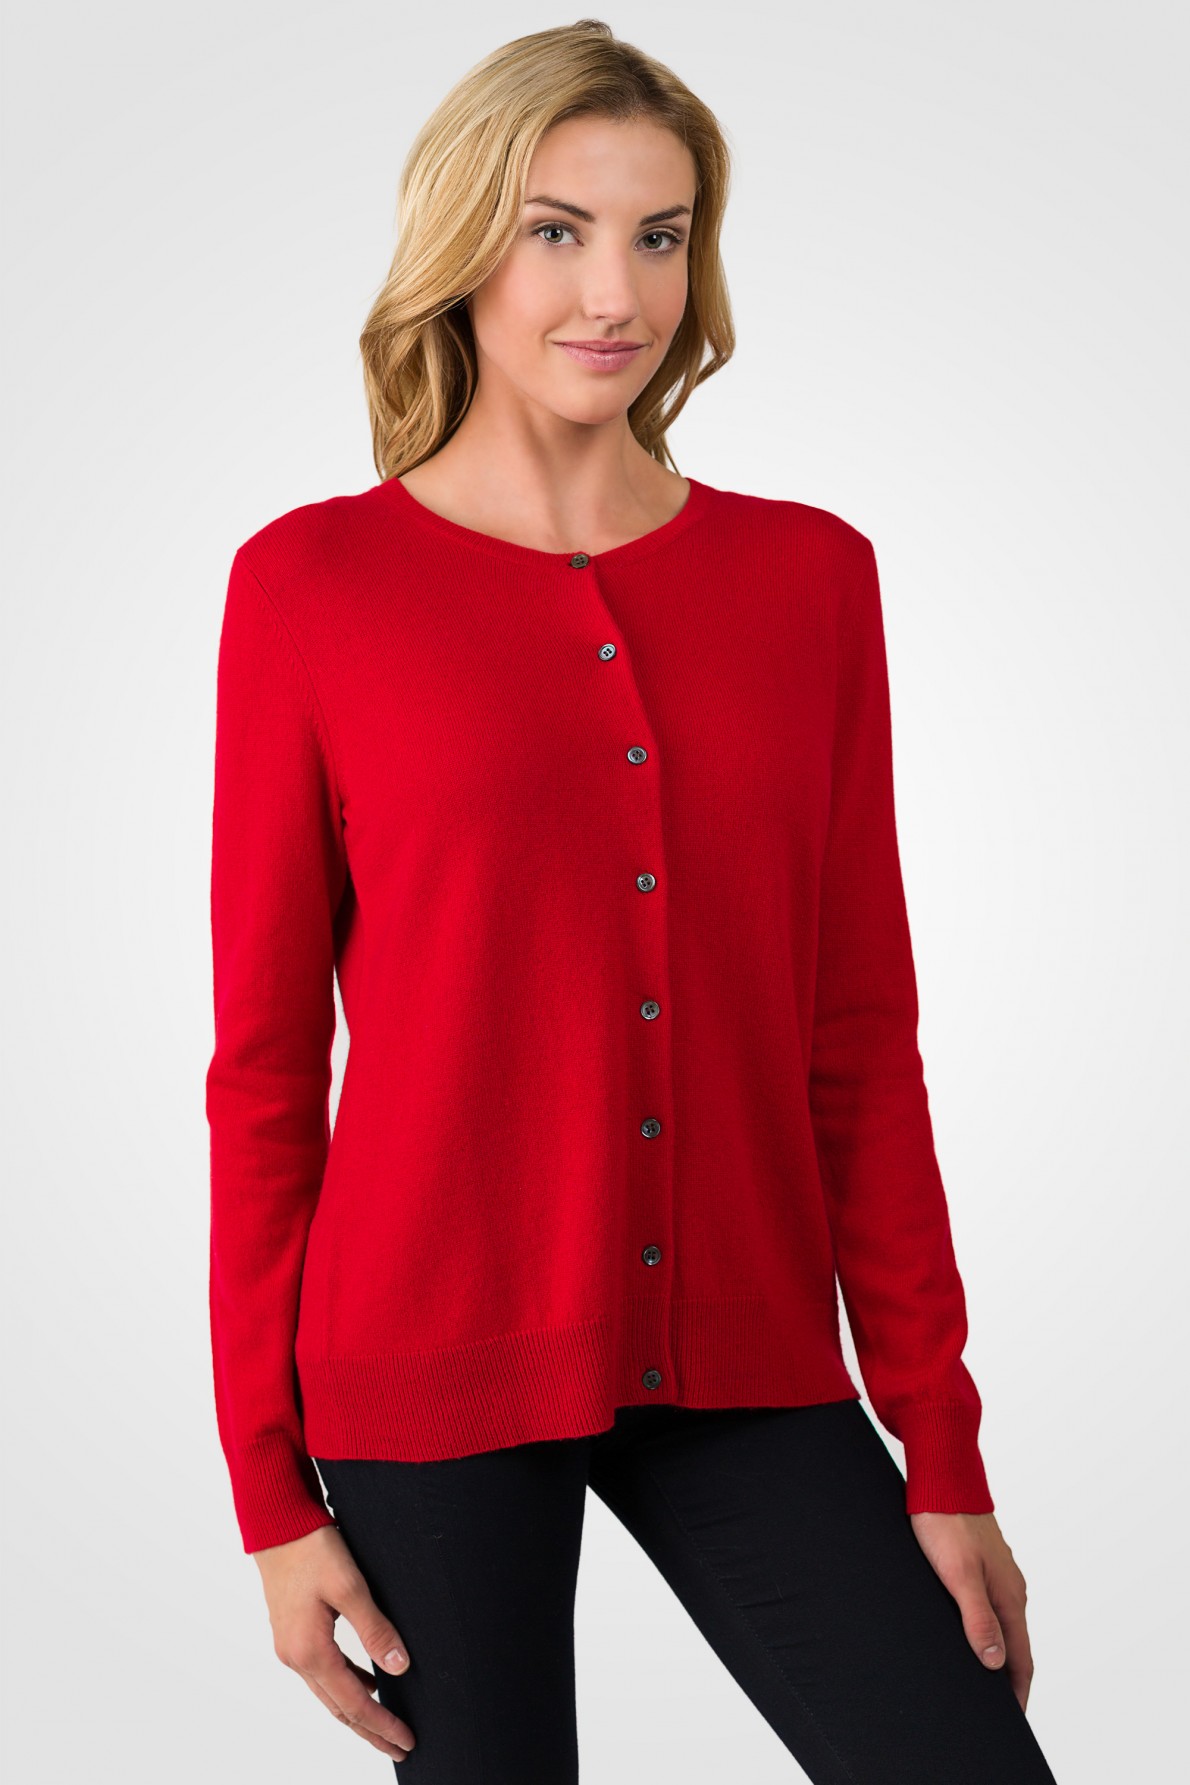 cashmere cardigan red cashmere button front cardigan sweater right side view pbfqlgb